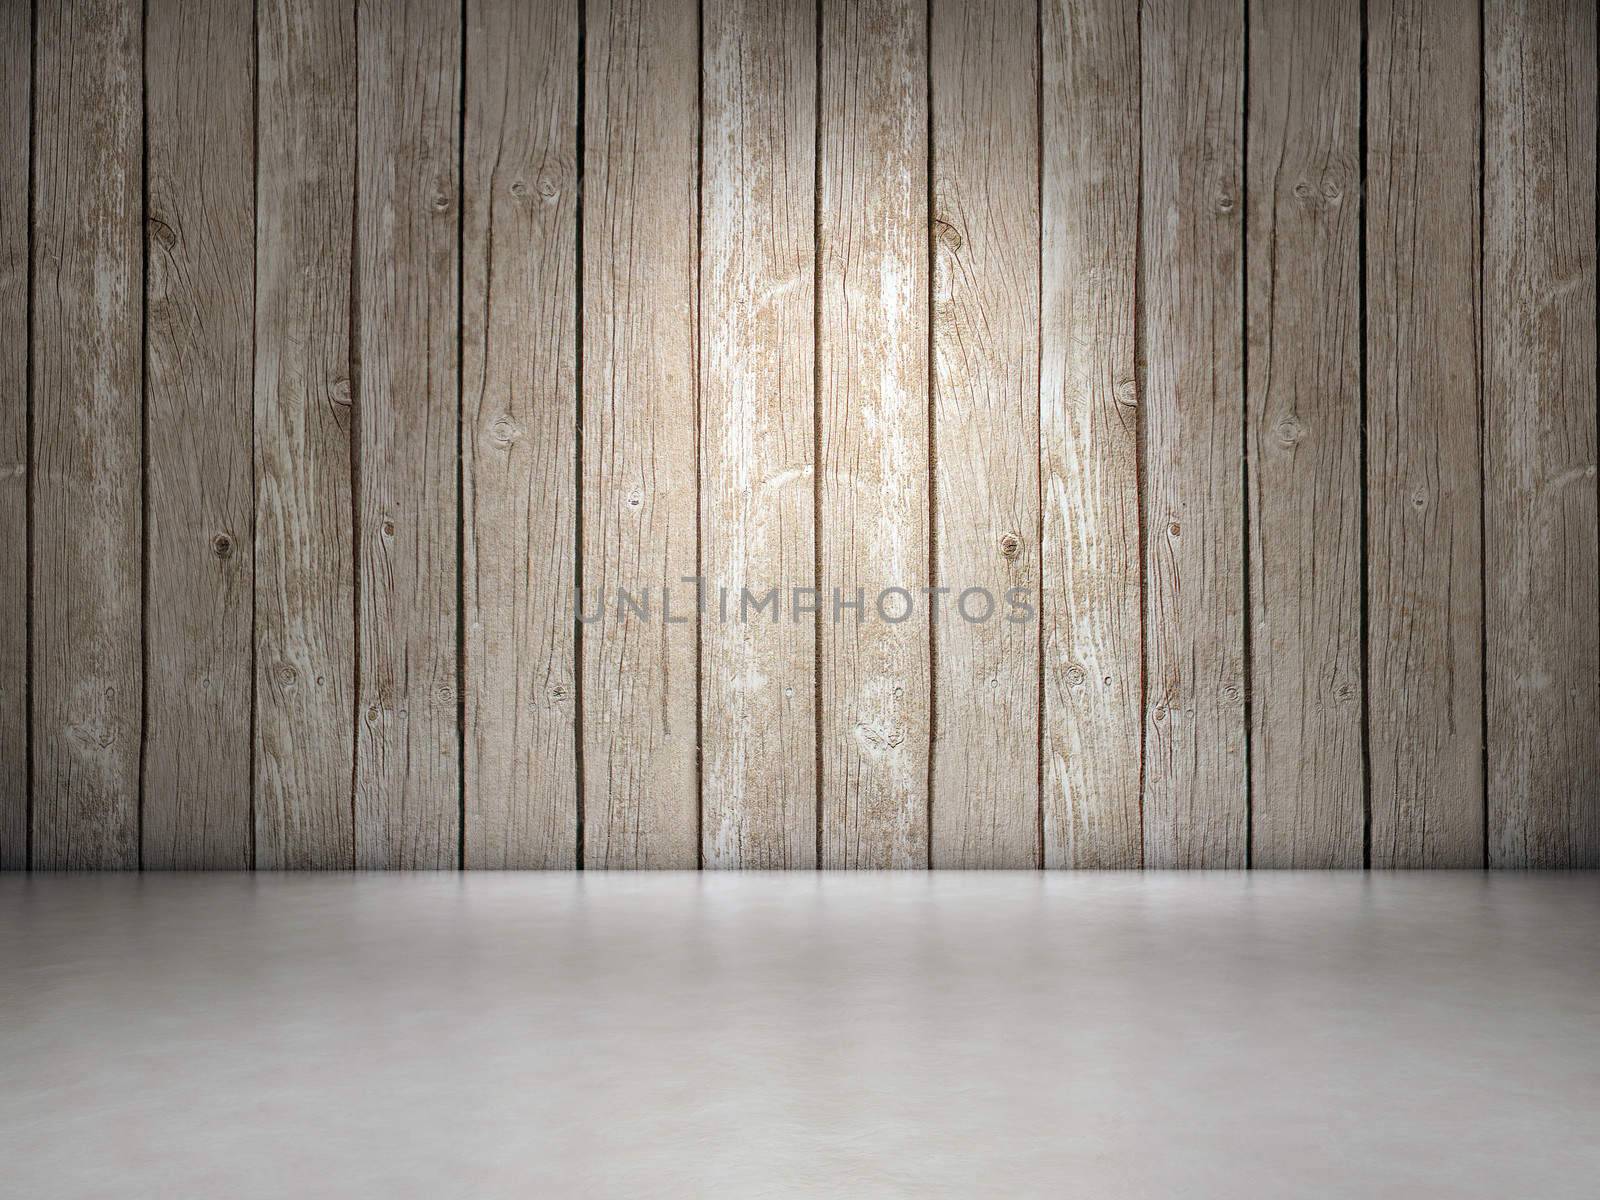 Wood and ceramic by dynamicfoto